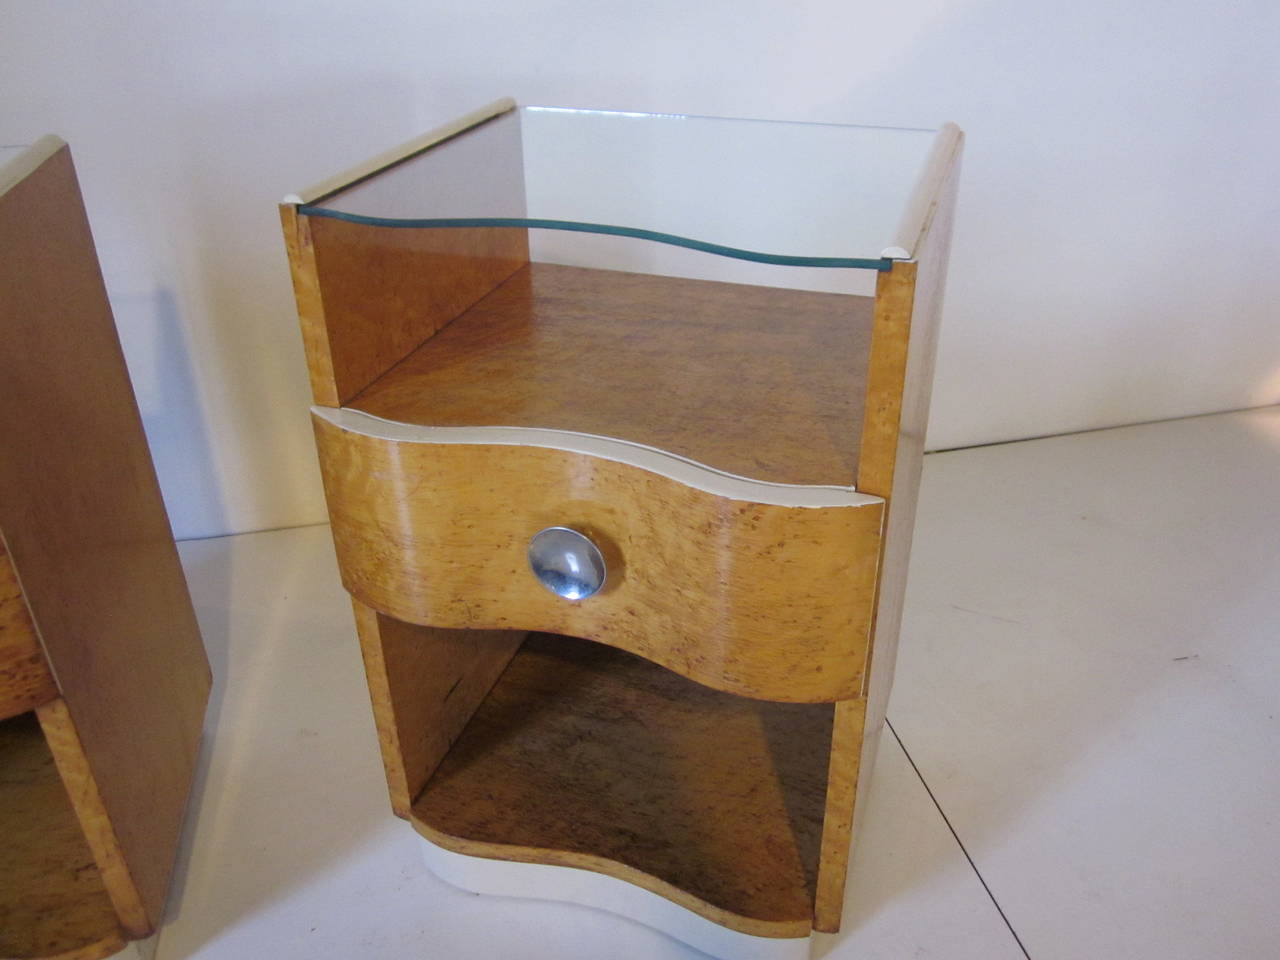 A pair of bird's-eye maple nightstands with drawer and large chrome pulls, upper and lower storage areas with matching contorted glass slide out top. Painted edge detail gives the nightstands a real dimensional look.